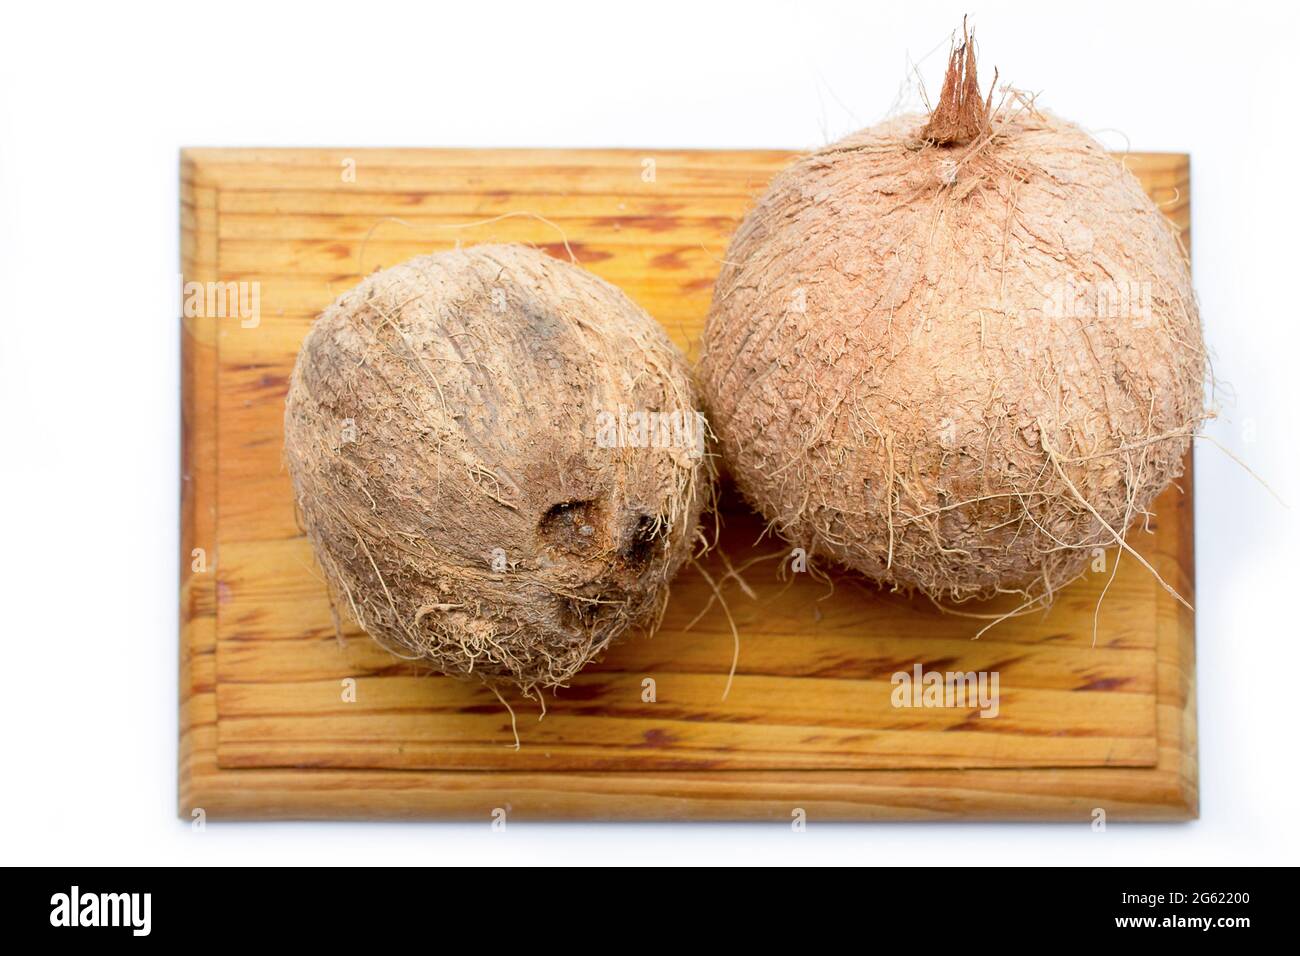 Whole coconuts on a wooden board on a white background. Tropical fruit from the Caribbean coasts Stock Photo